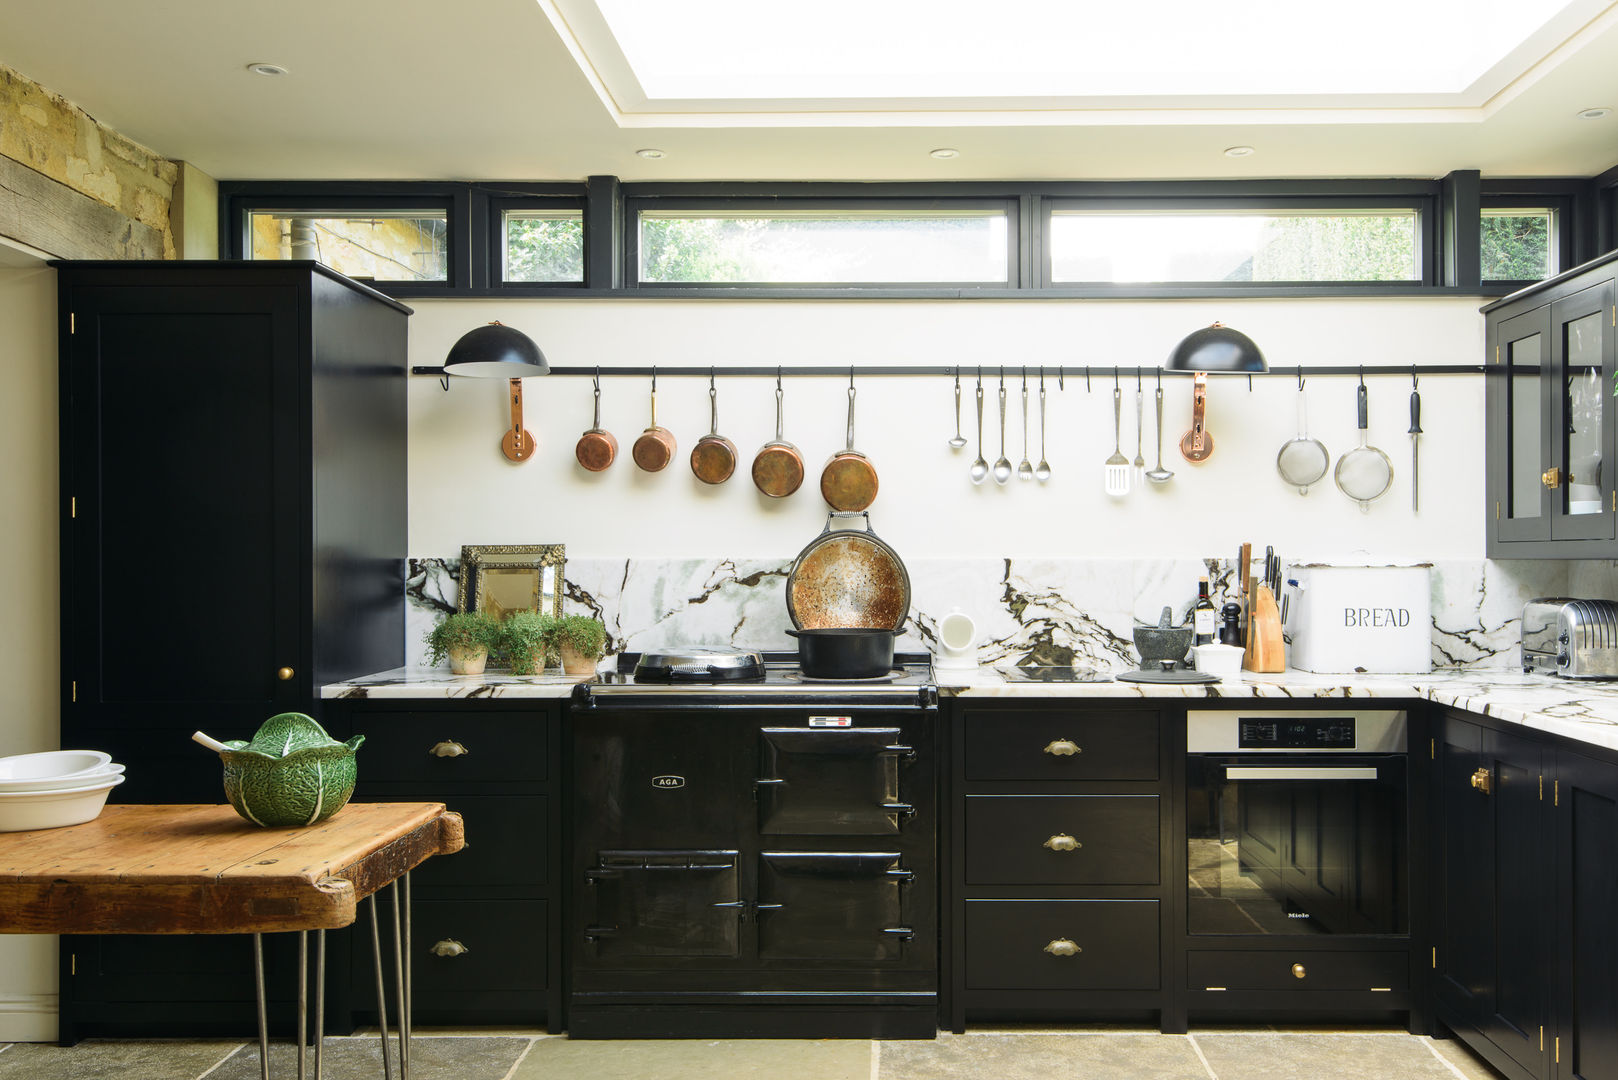 The Chipping Norton Kitchen by deVOL deVOL Kitchens Built-in kitchens Solid Wood Multicolored